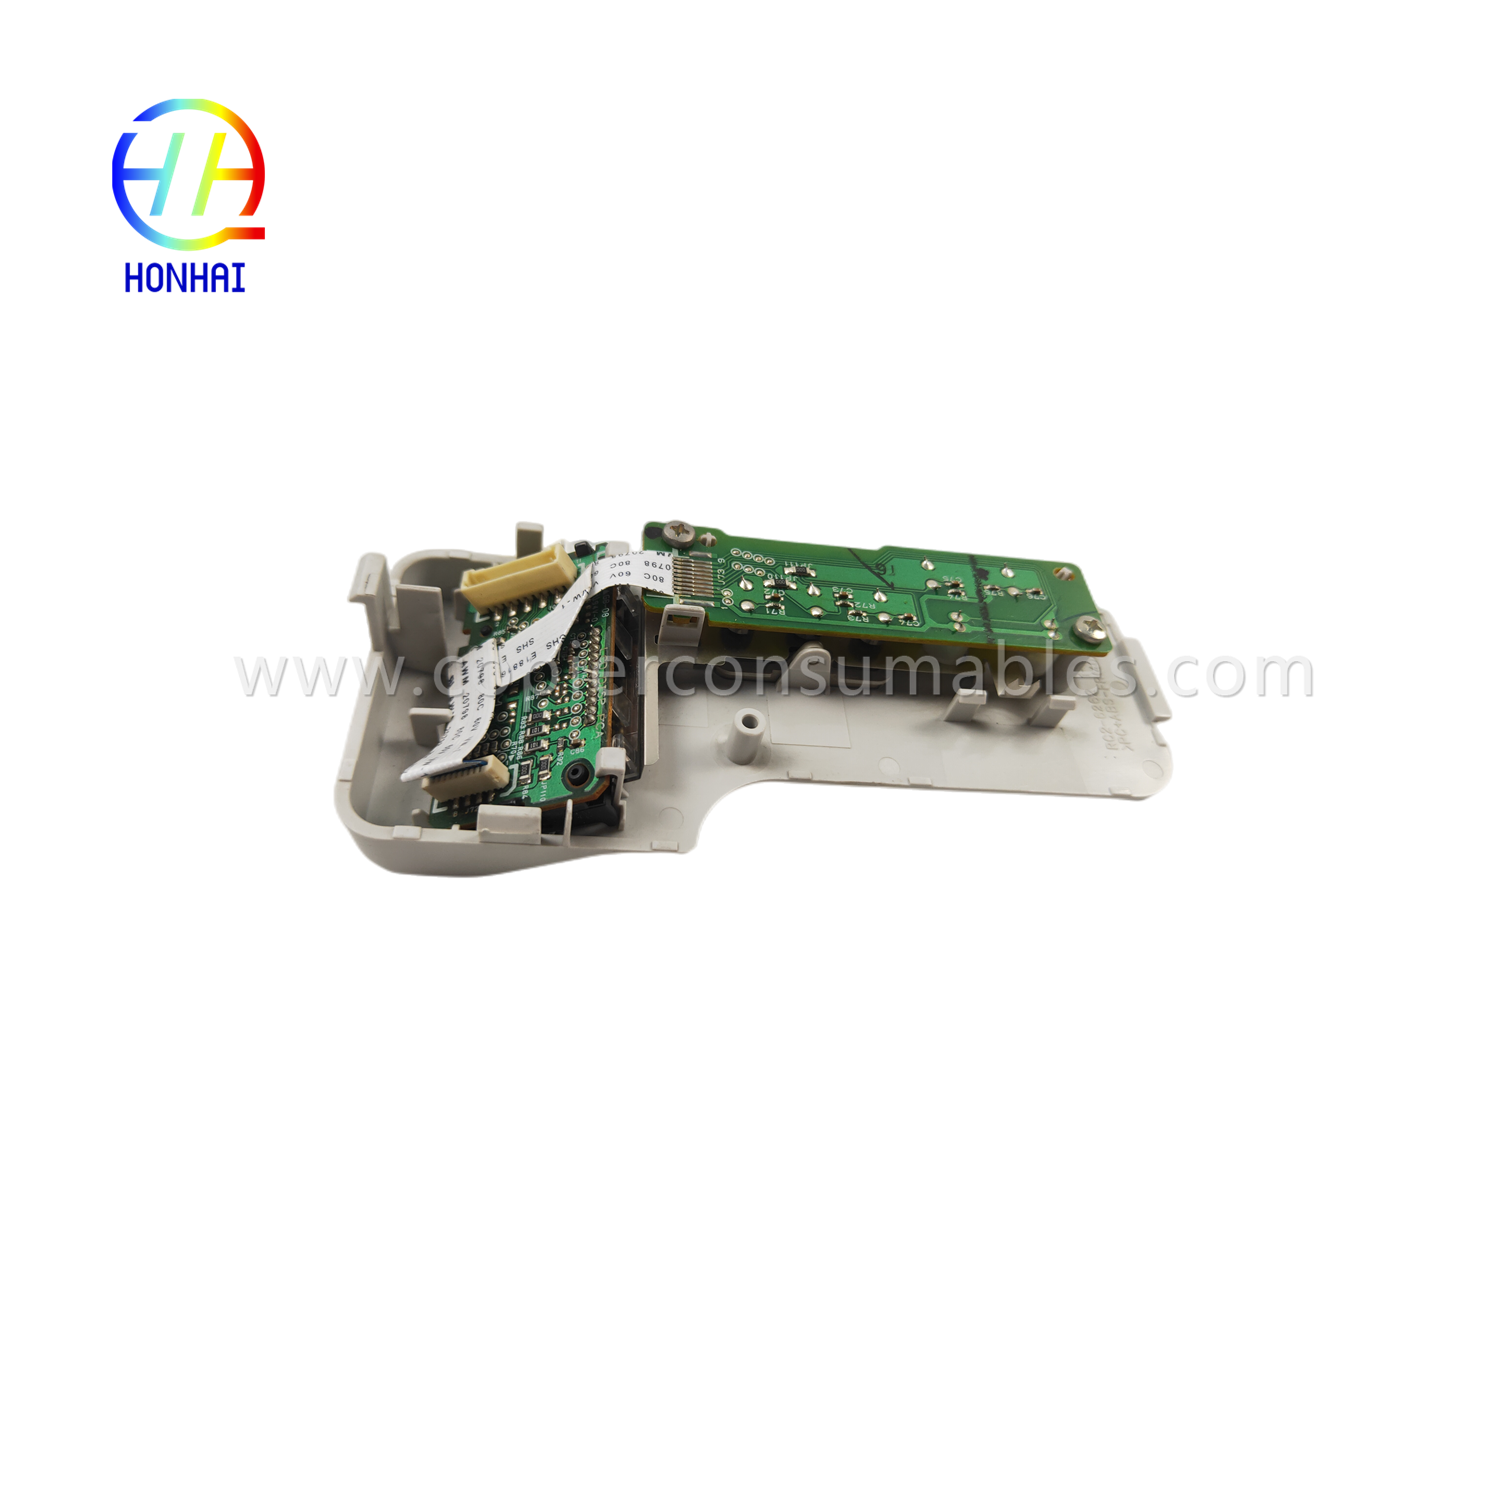 https://c585.goodao.net/control-panel-display-for-hp-rc2-6262-p2030-p2035-p2055dn-product/